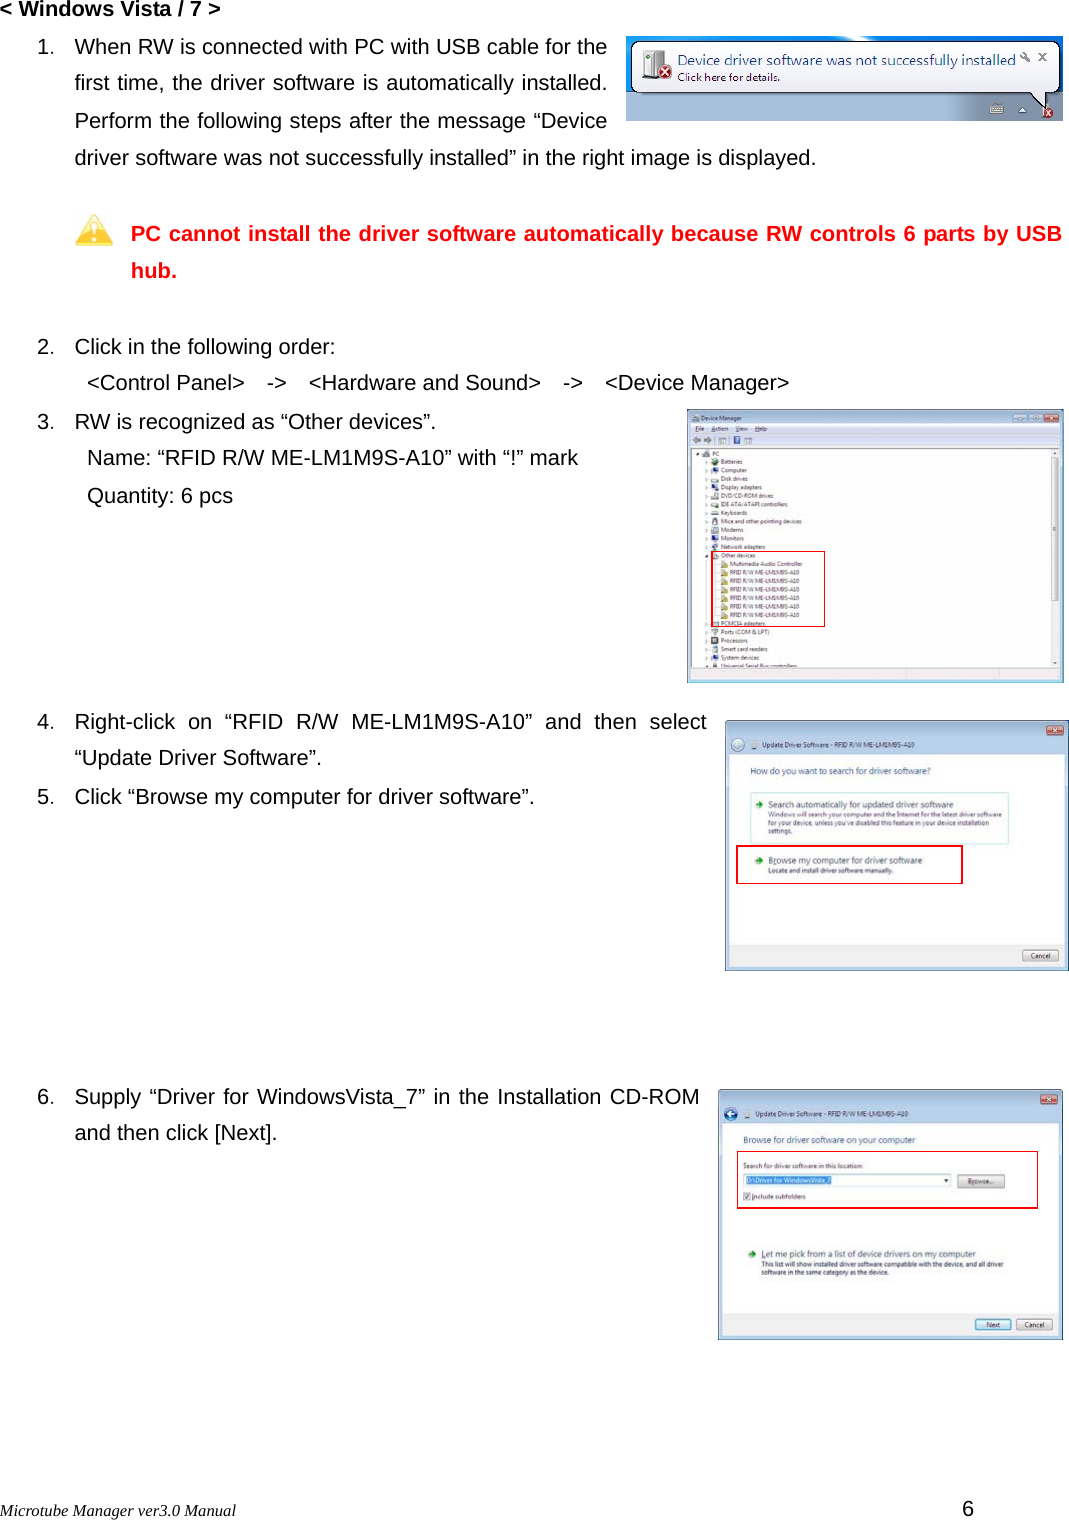 Microtube Manager ver3.0 Manual         6 &lt; Windows Vista / 7 &gt; 1．  When RW is connected with PC with USB cable for the first time, the driver software is automatically installed. Perform the following steps after the message “Device driver software was not successfully installed” in the right image is displayed.  PC cannot install the driver software automatically because RW controls 6 parts by USB hub.  2．  Click in the following order: &lt;Control Panel&gt;  -&gt;  &lt;Hardware and Sound&gt;  -&gt;  &lt;Device Manager&gt; 3．  RW is recognized as “Other devices”. Name: “RFID R/W ME-LM1M9S-A10” with “!” mark   Quantity: 6 pcs      4． Right-click on “RFID R/W ME-LM1M9S-A10” and then select “Update Driver Software”. 5．  Click “Browse my computer for driver software”.          6． Supply “Driver for WindowsVista_7” in the Installation CD-ROM and then click [Next].      